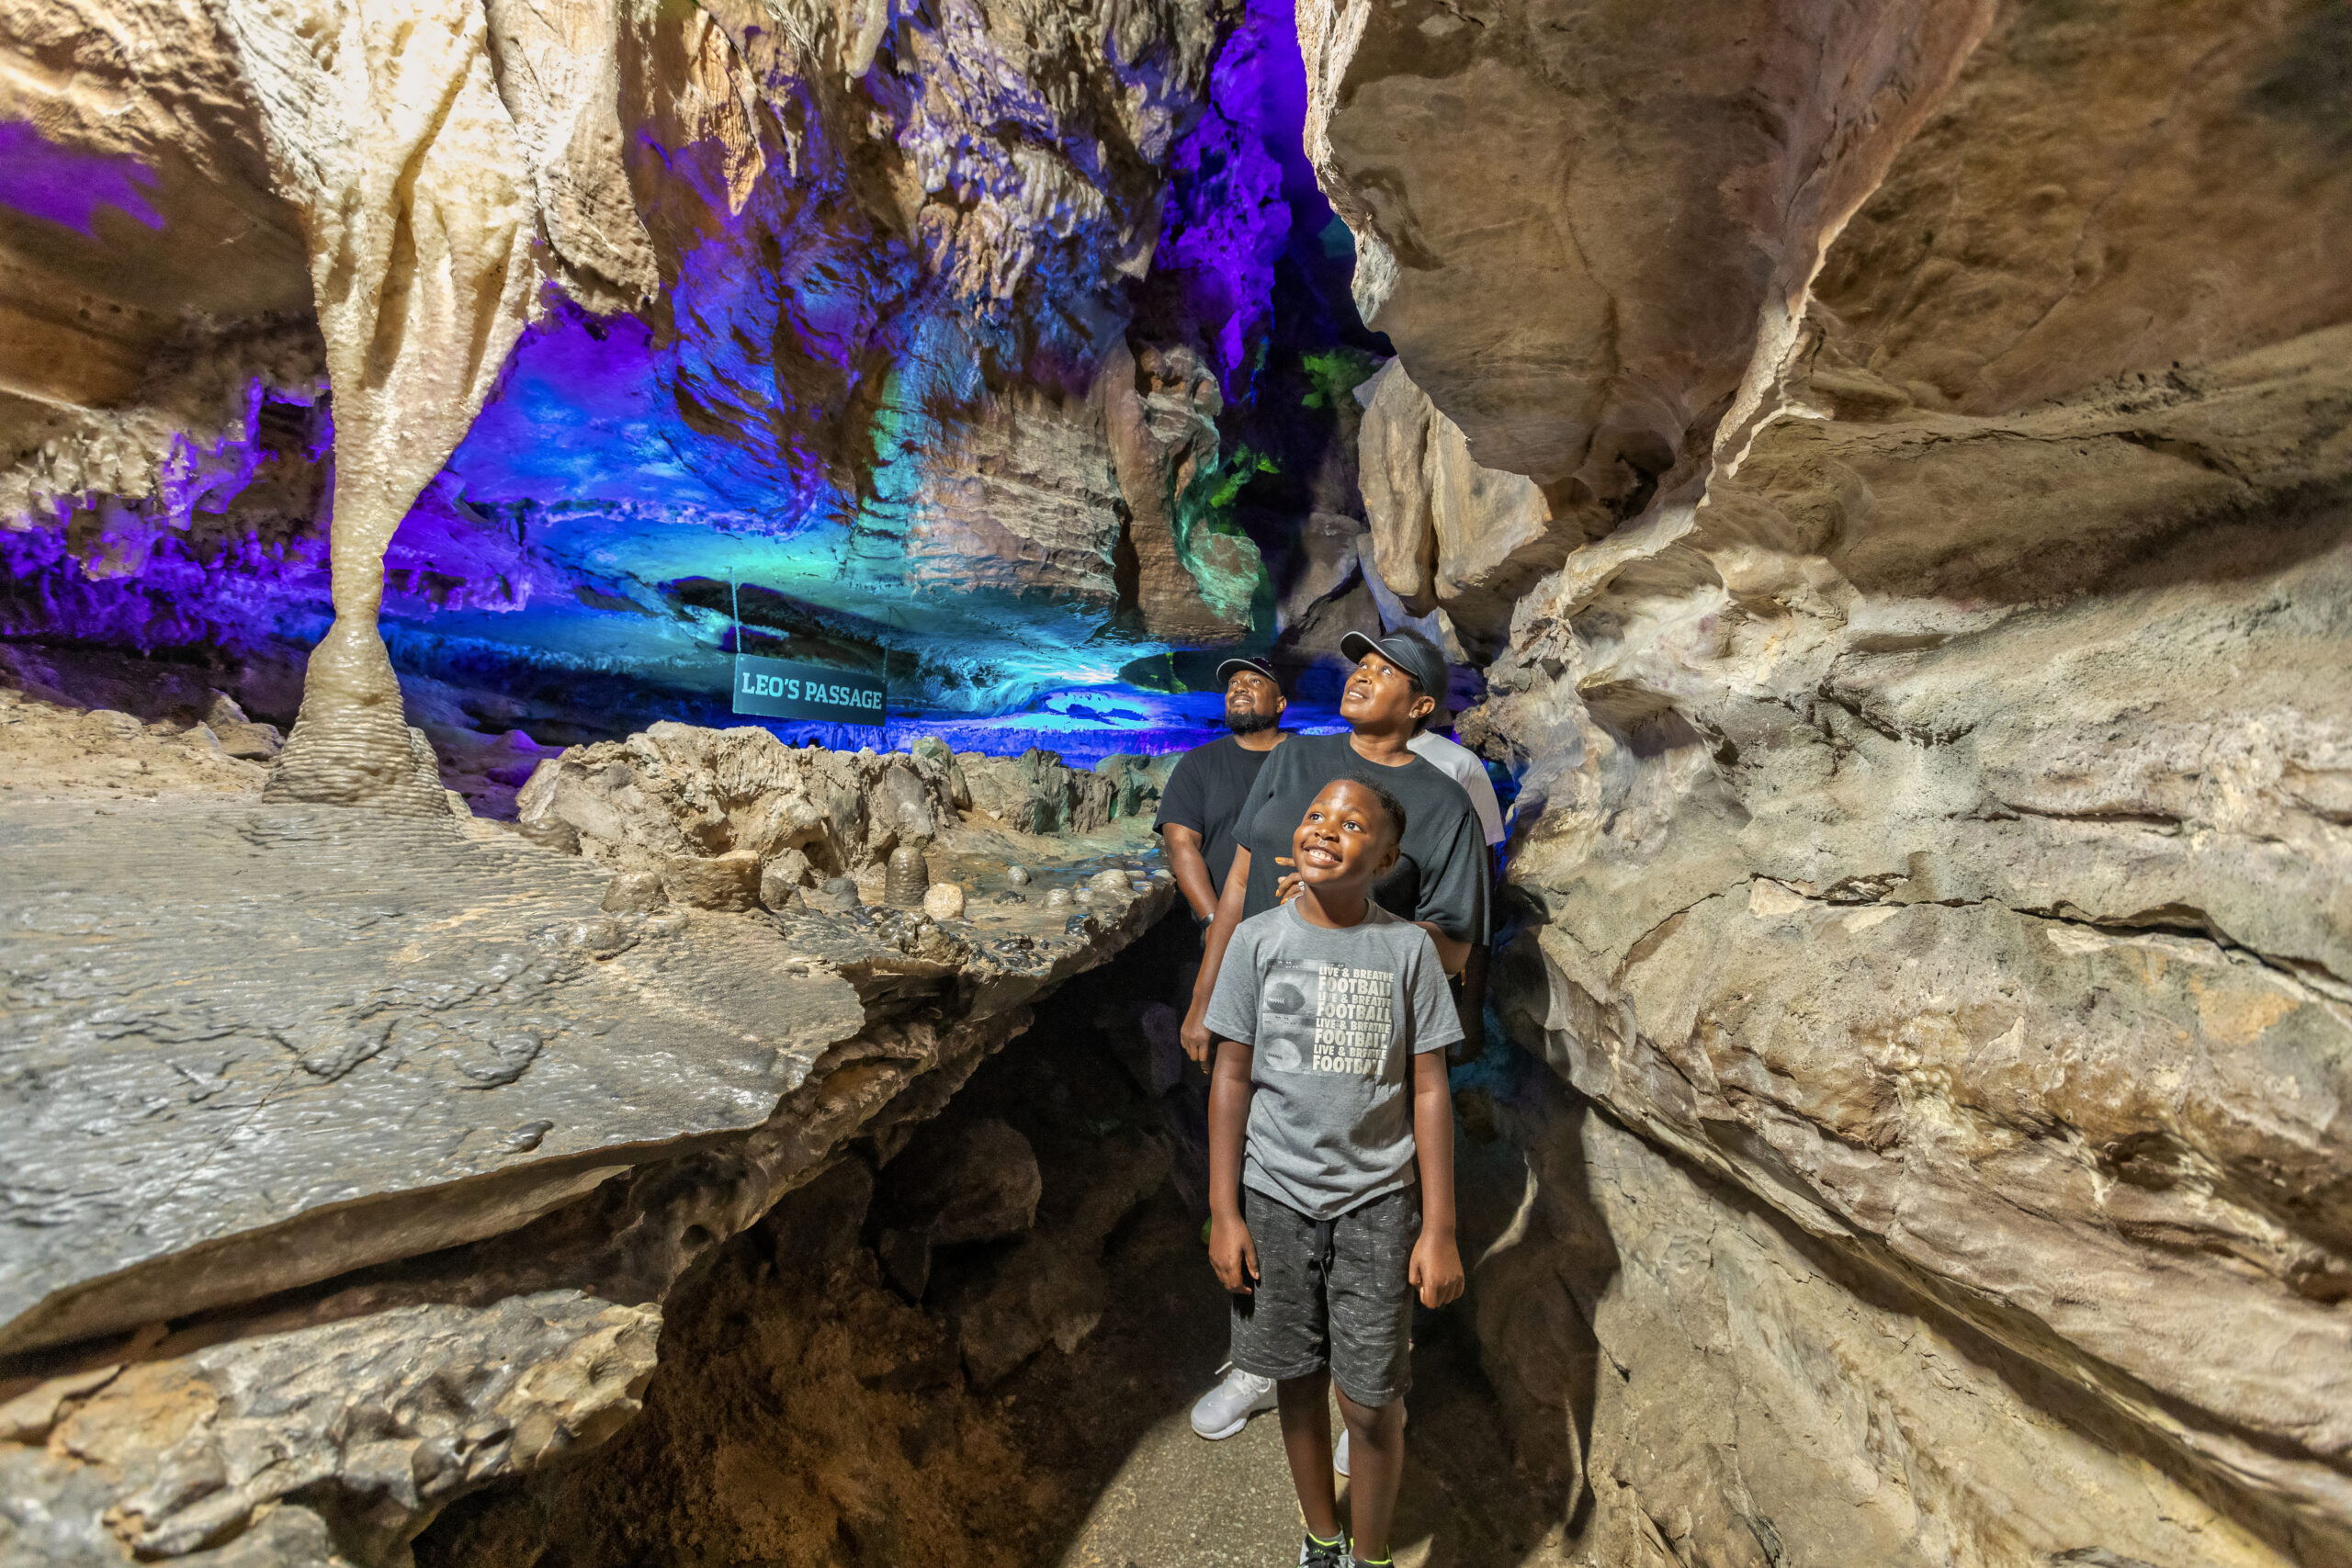 A family walks admiring the caves next to a sign reading 